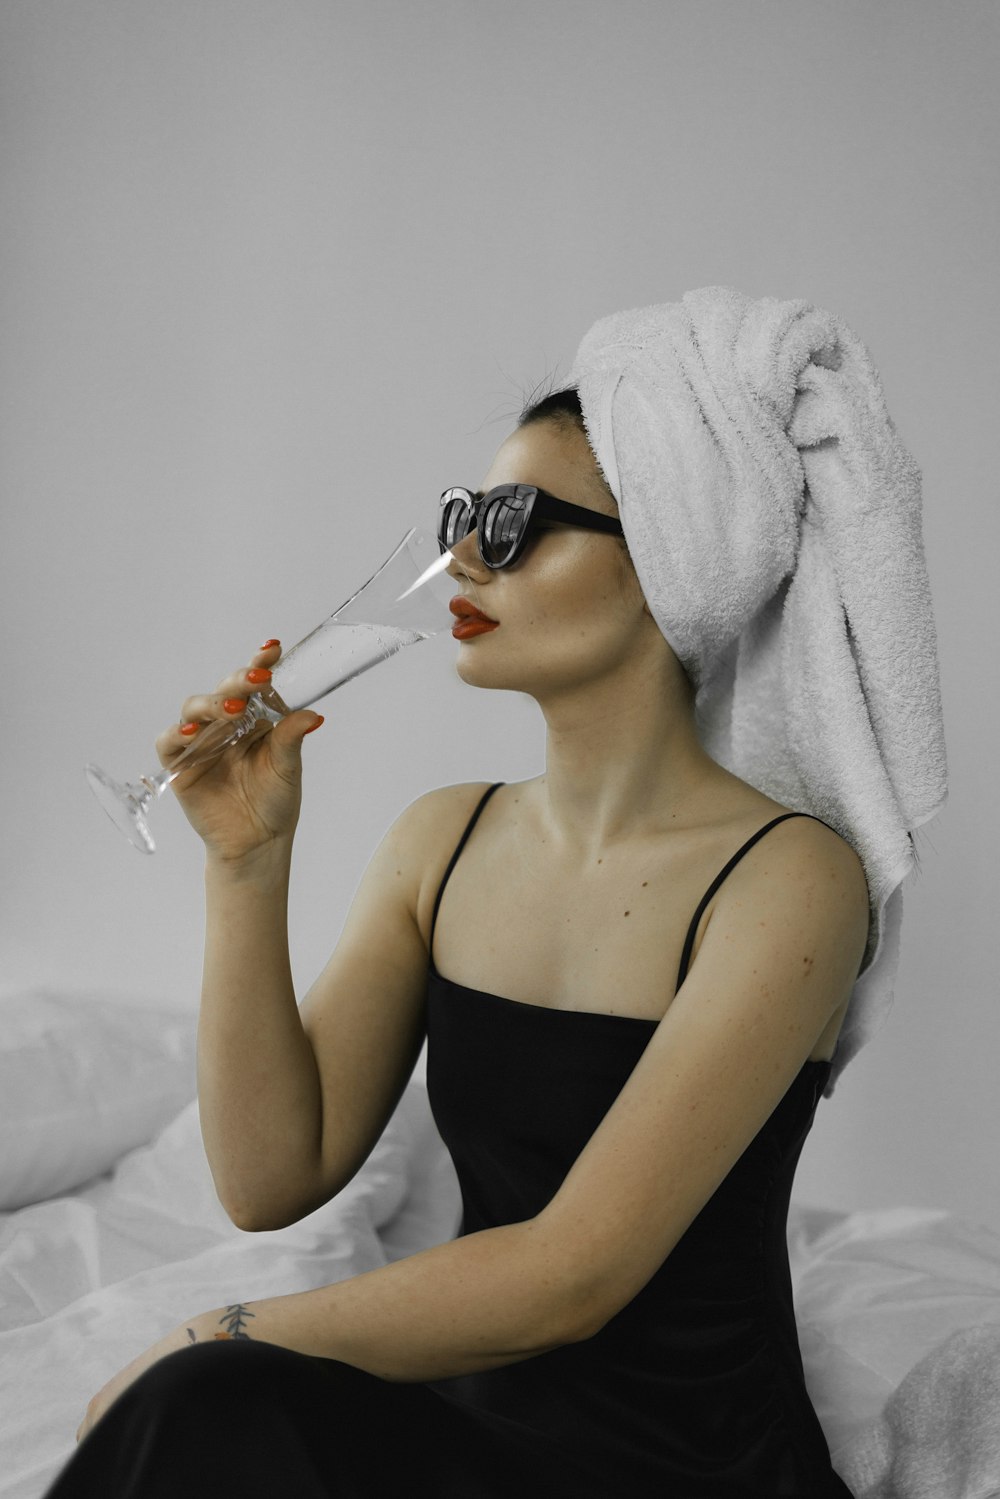 a woman with a towel on her head drinking a glass of wine